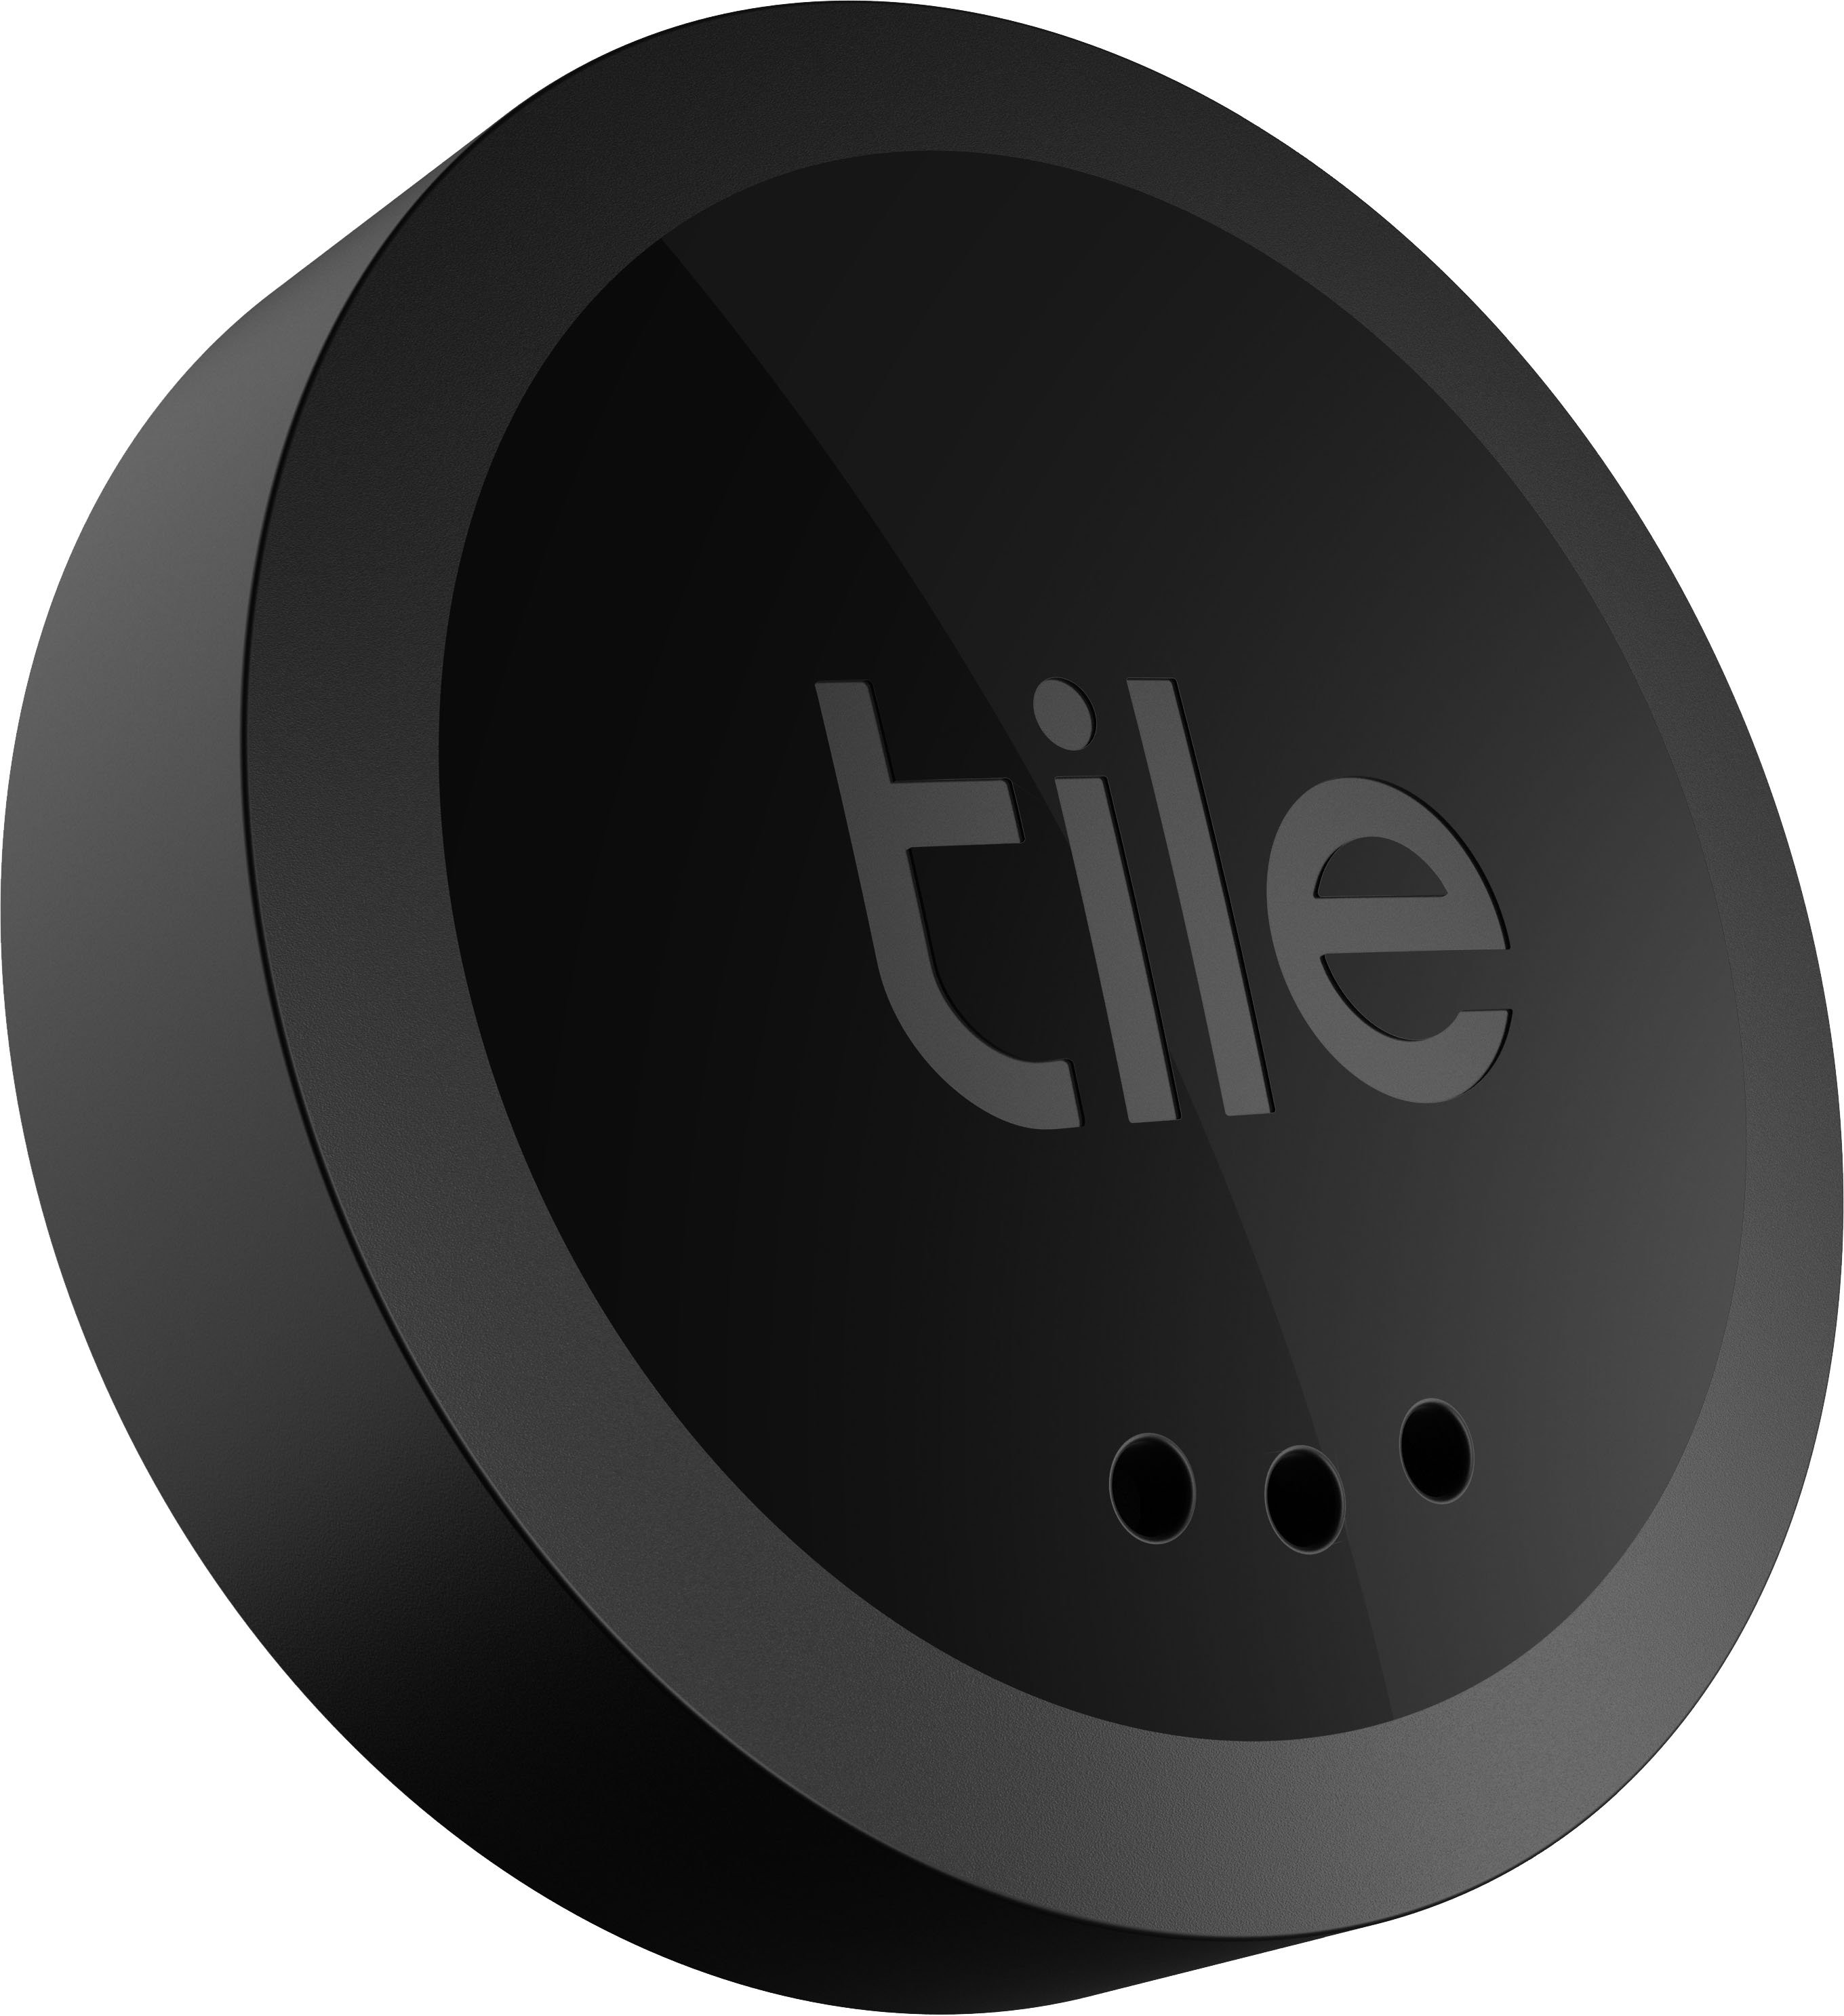 Tile Pro 2-Pack (Black/White). Powerful Bluetooth Tracker, Keys Finder and  Item Locator for Keys, Bags, and More; Up to 400 ft Range. Water-Resistant.